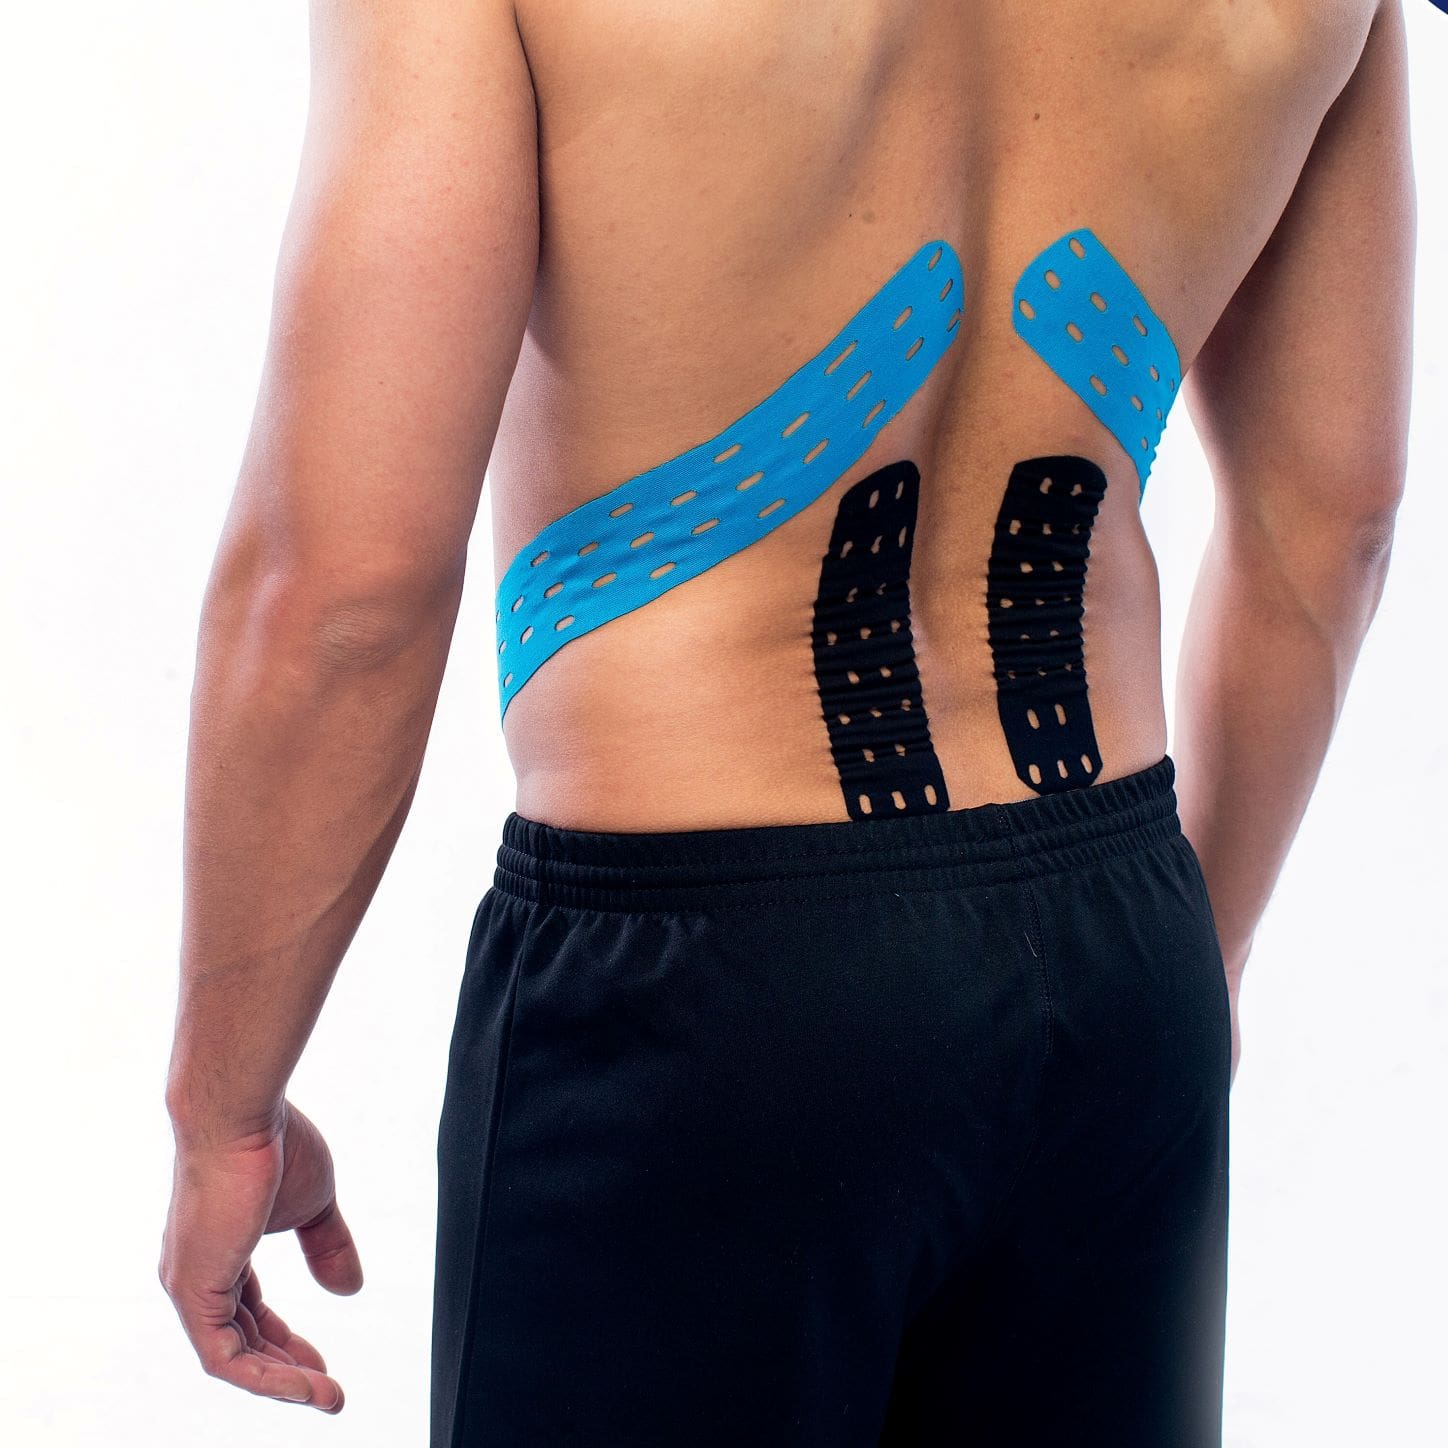 tuv k-tape sports muscle relieve pain